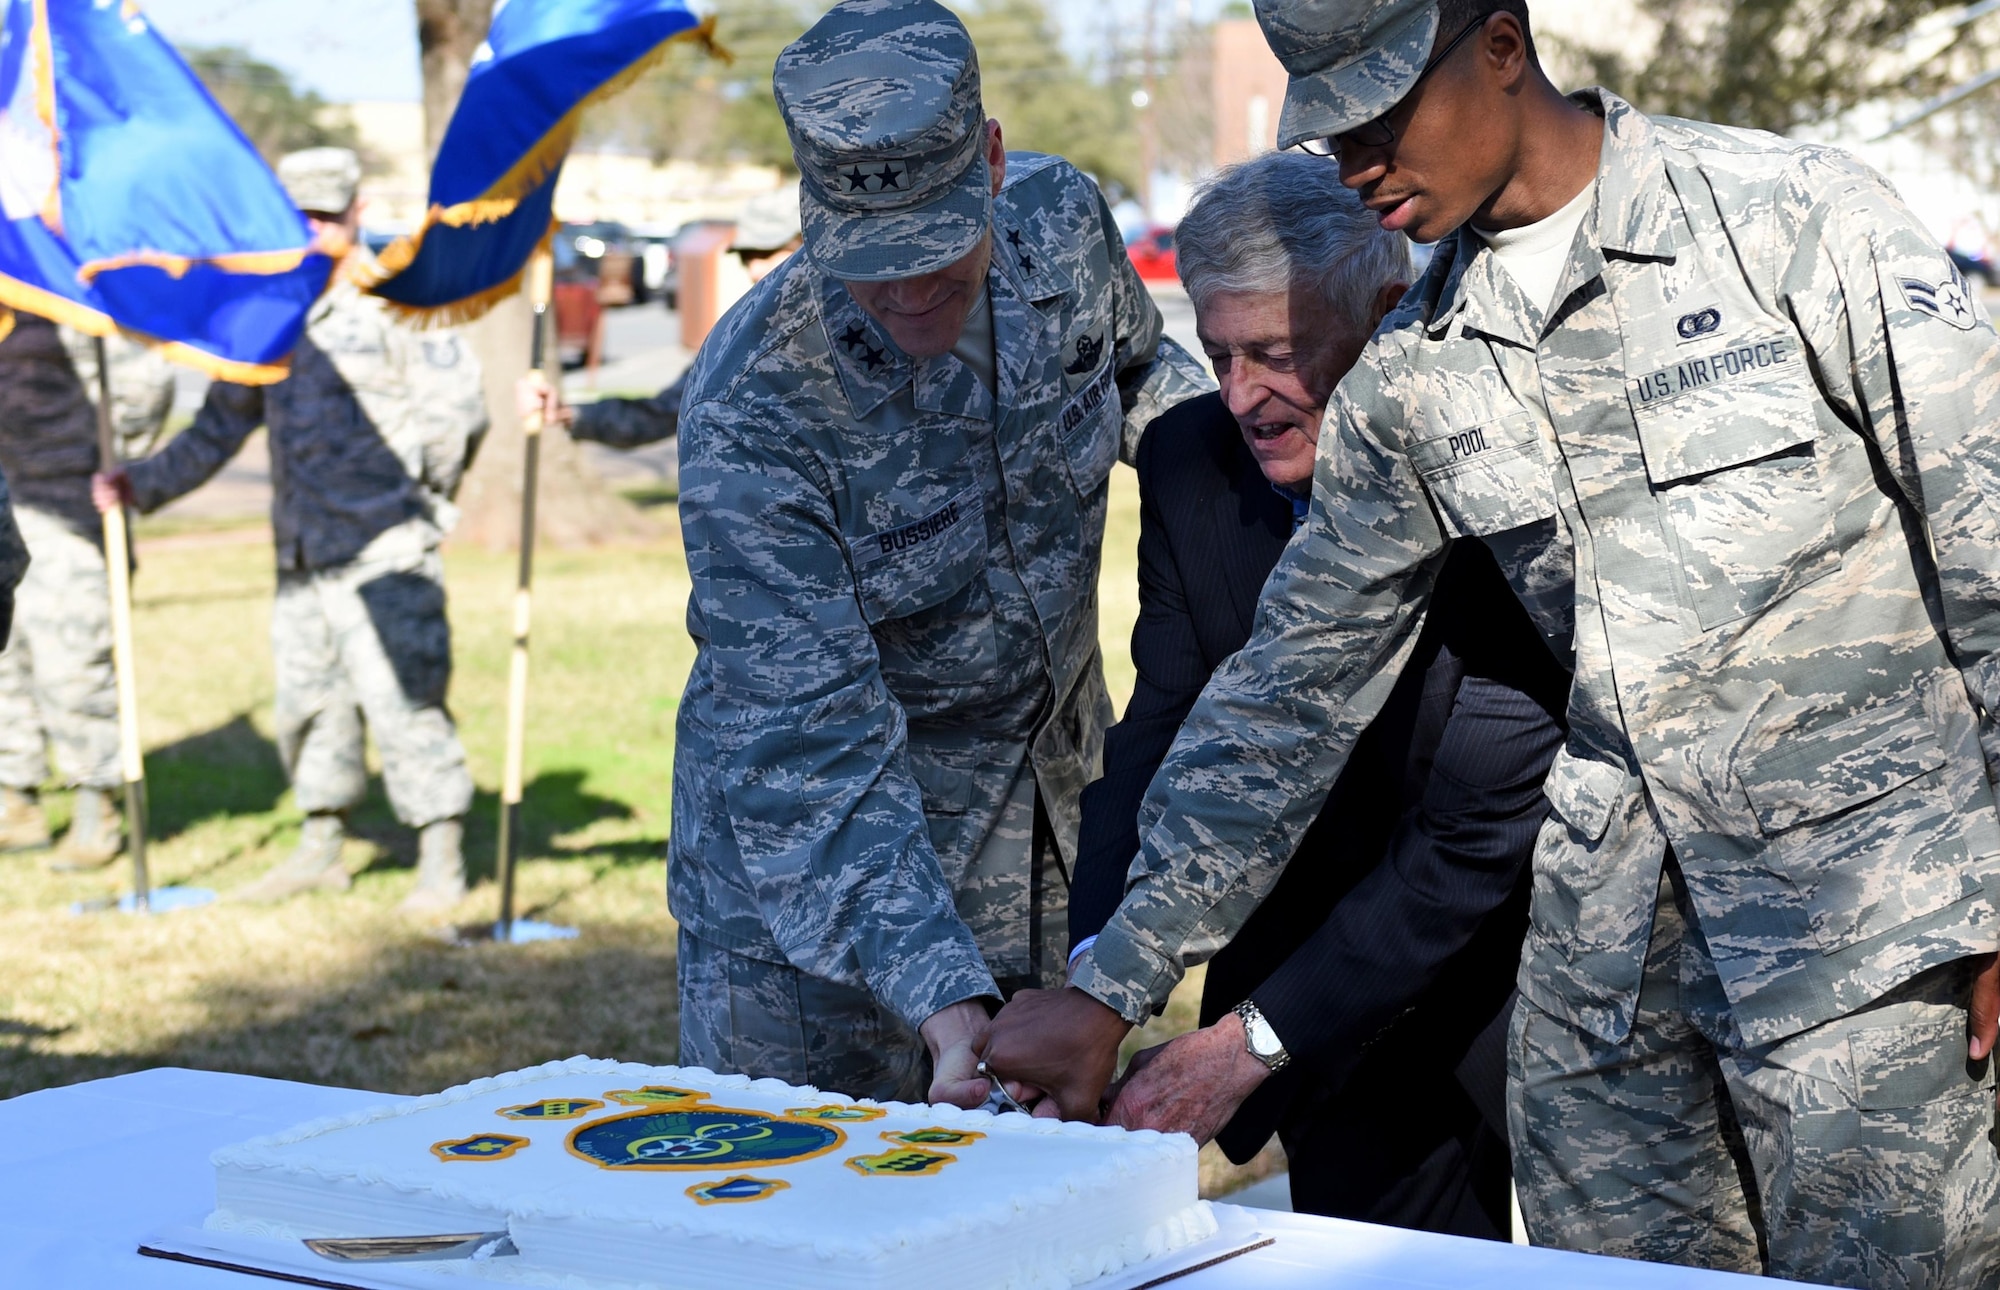 Maj. Gen. Thomas Bussiere, 8th Air Force commander, participates in a cake cutting ceremony with a former 8th AF commander, Gen. James McCarthy, (retired), and Airman 1st Class De’Andre Pool, 608th Air Operations Center administration apprentice, at Barksdale Air Force Base, La., Feb. 2, 2017. Various events, such as a memorial run, building dedication, cake cutting ceremony, and a local organization sponsored gala, took place to honor and commemorate the former, present and future Airmen of the “Mighty Eighth”. (U.S. Air Force photo by Senior Airman Erin Trower) 